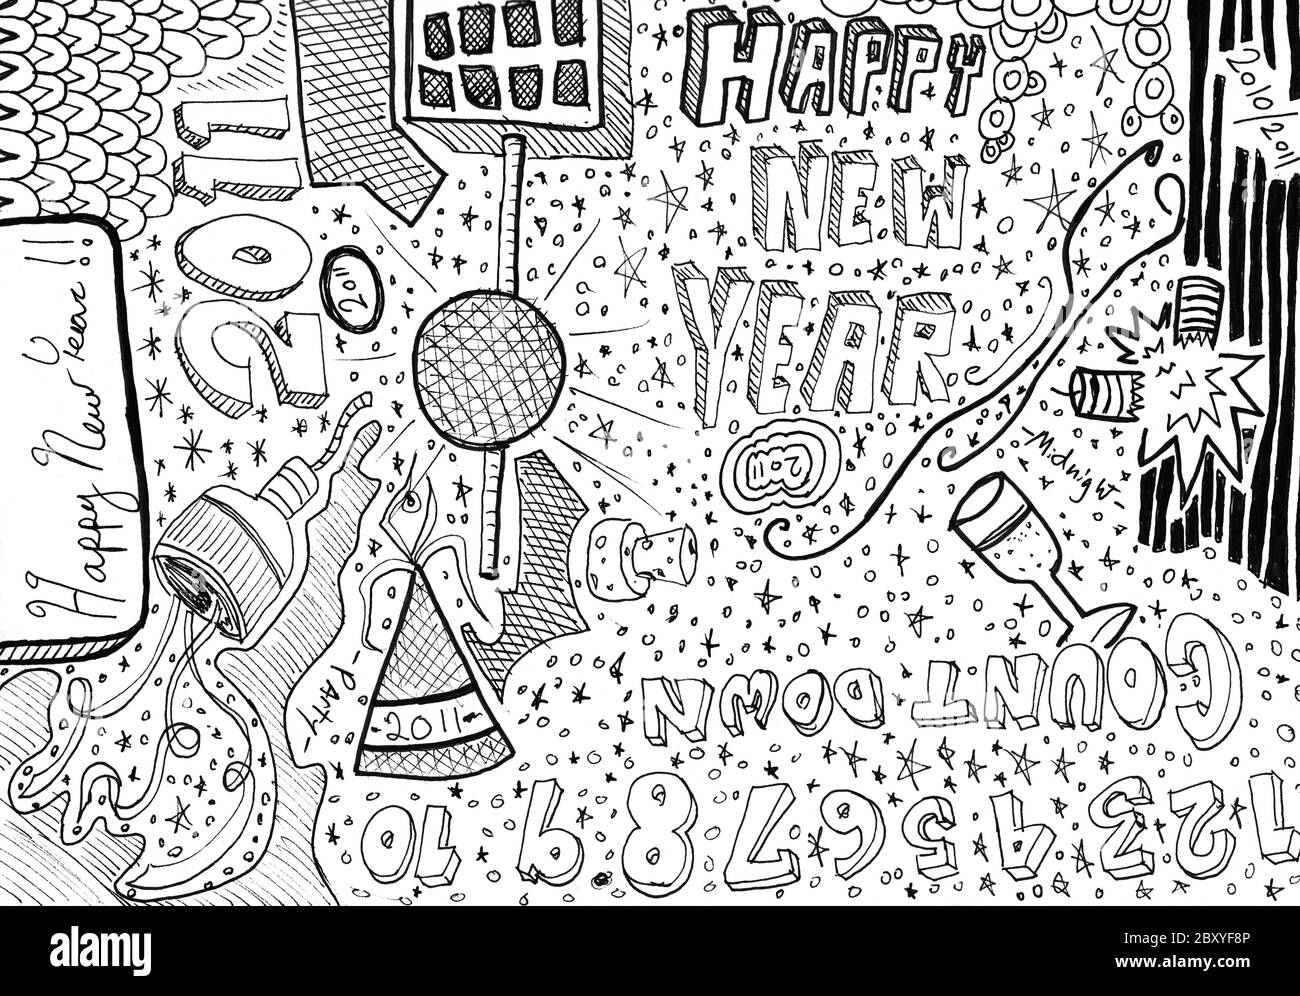 Happy new year hand drawn doodles Stock Photo